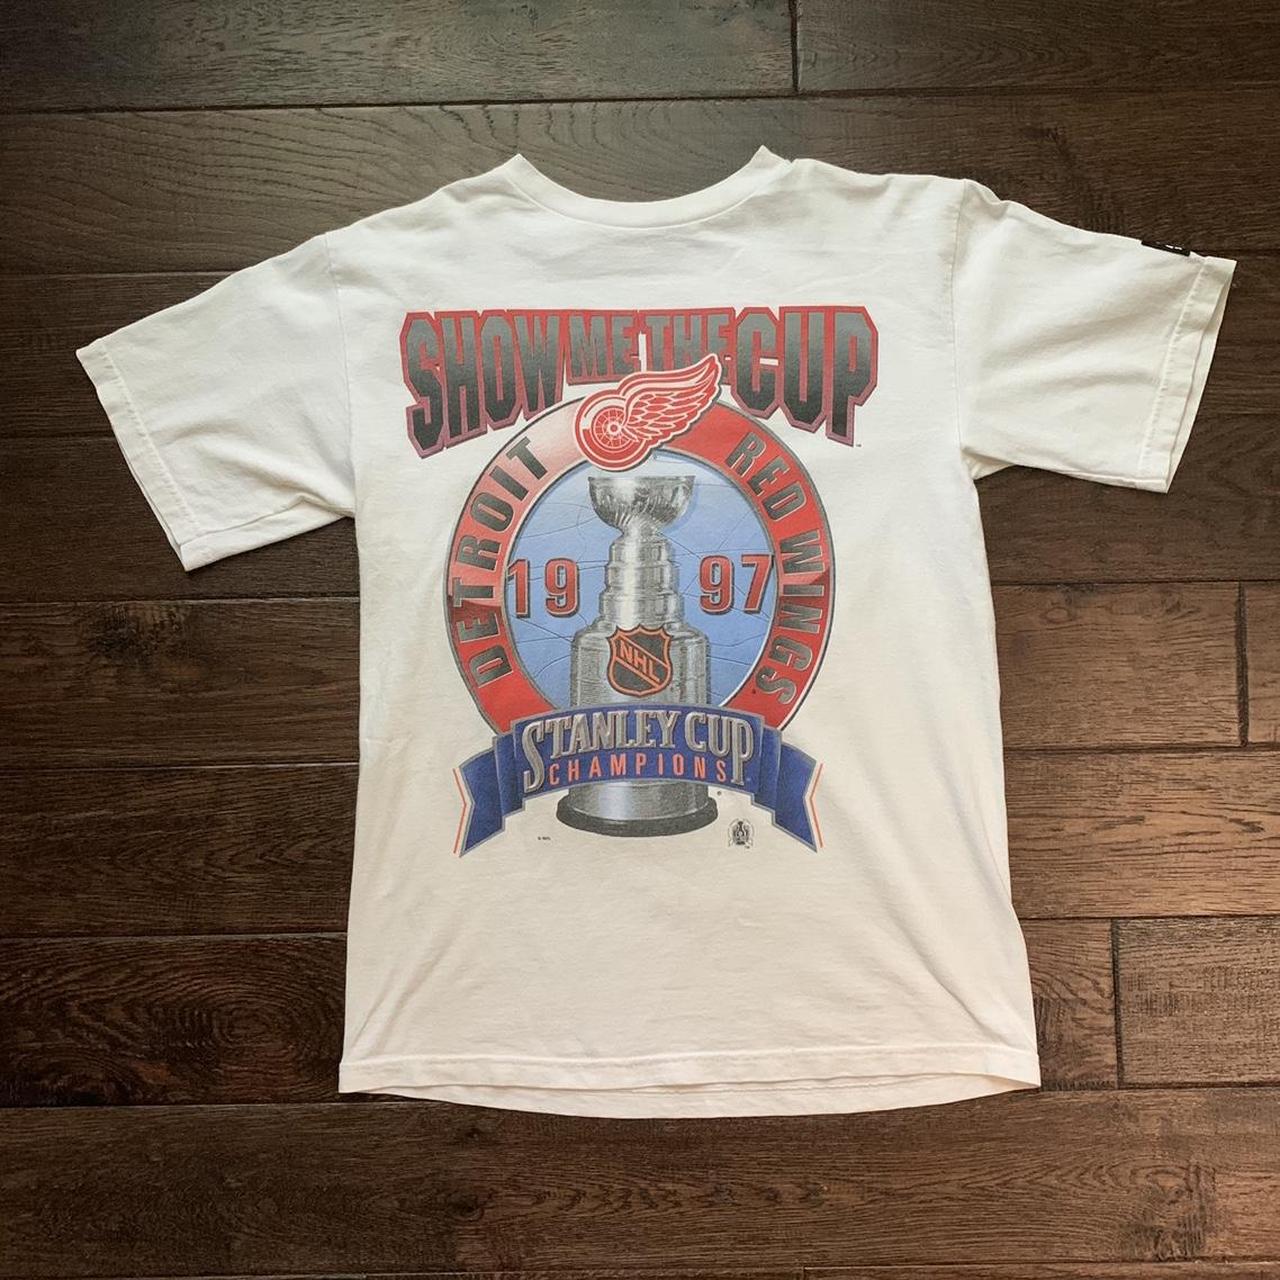 1997 Starter Detroit Red Wings T Shirt Show Me The Cup Stanley